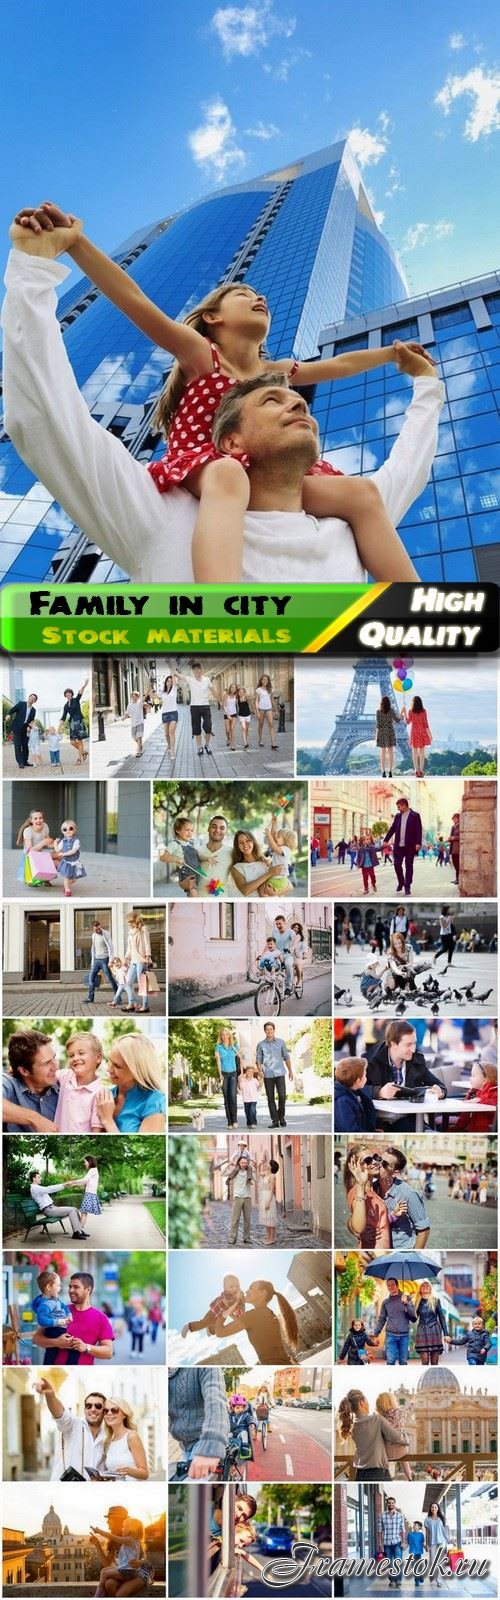 Friendly family and couple walking in city - 25 HQ Jpg